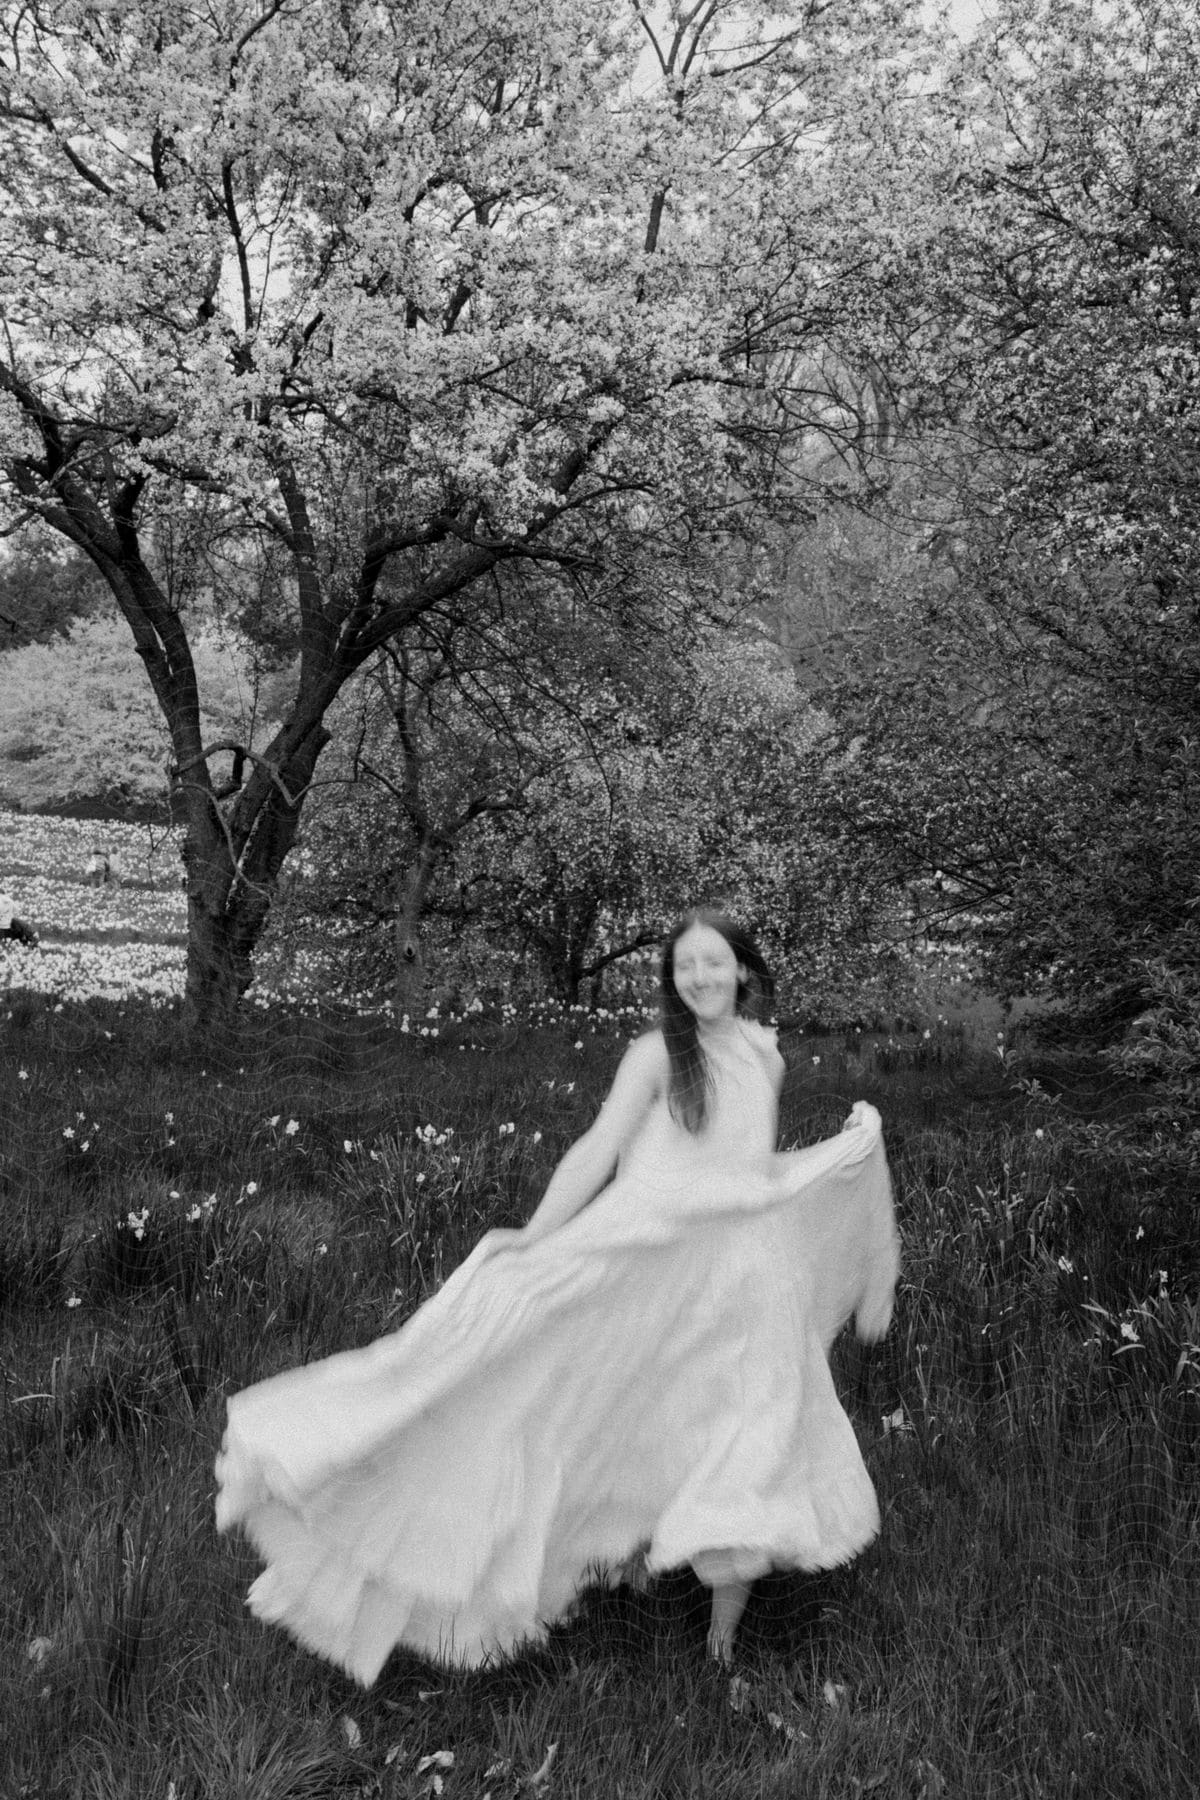 A woman in a long white dress is walking in a grass field and behind there is a tree with many flowers